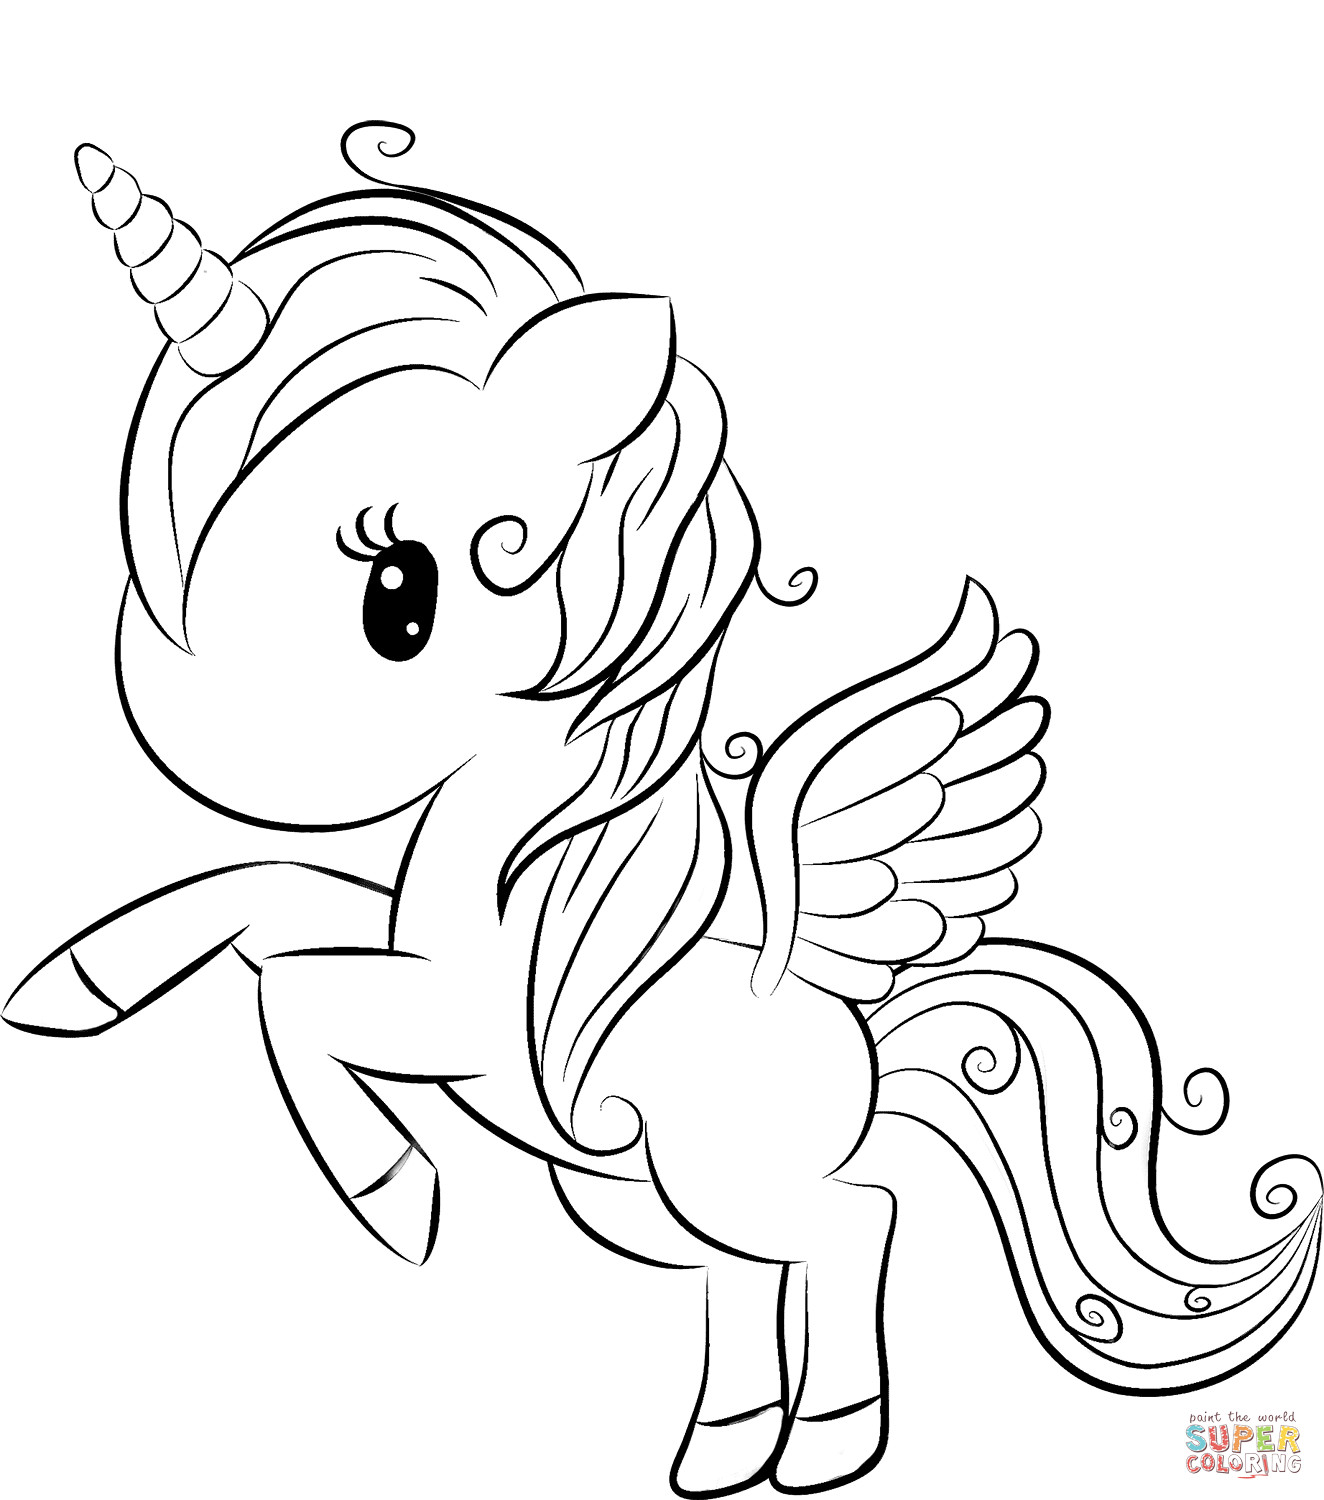 Coloring Pages For Girls Unicorn
 Cute Unicorn coloring page